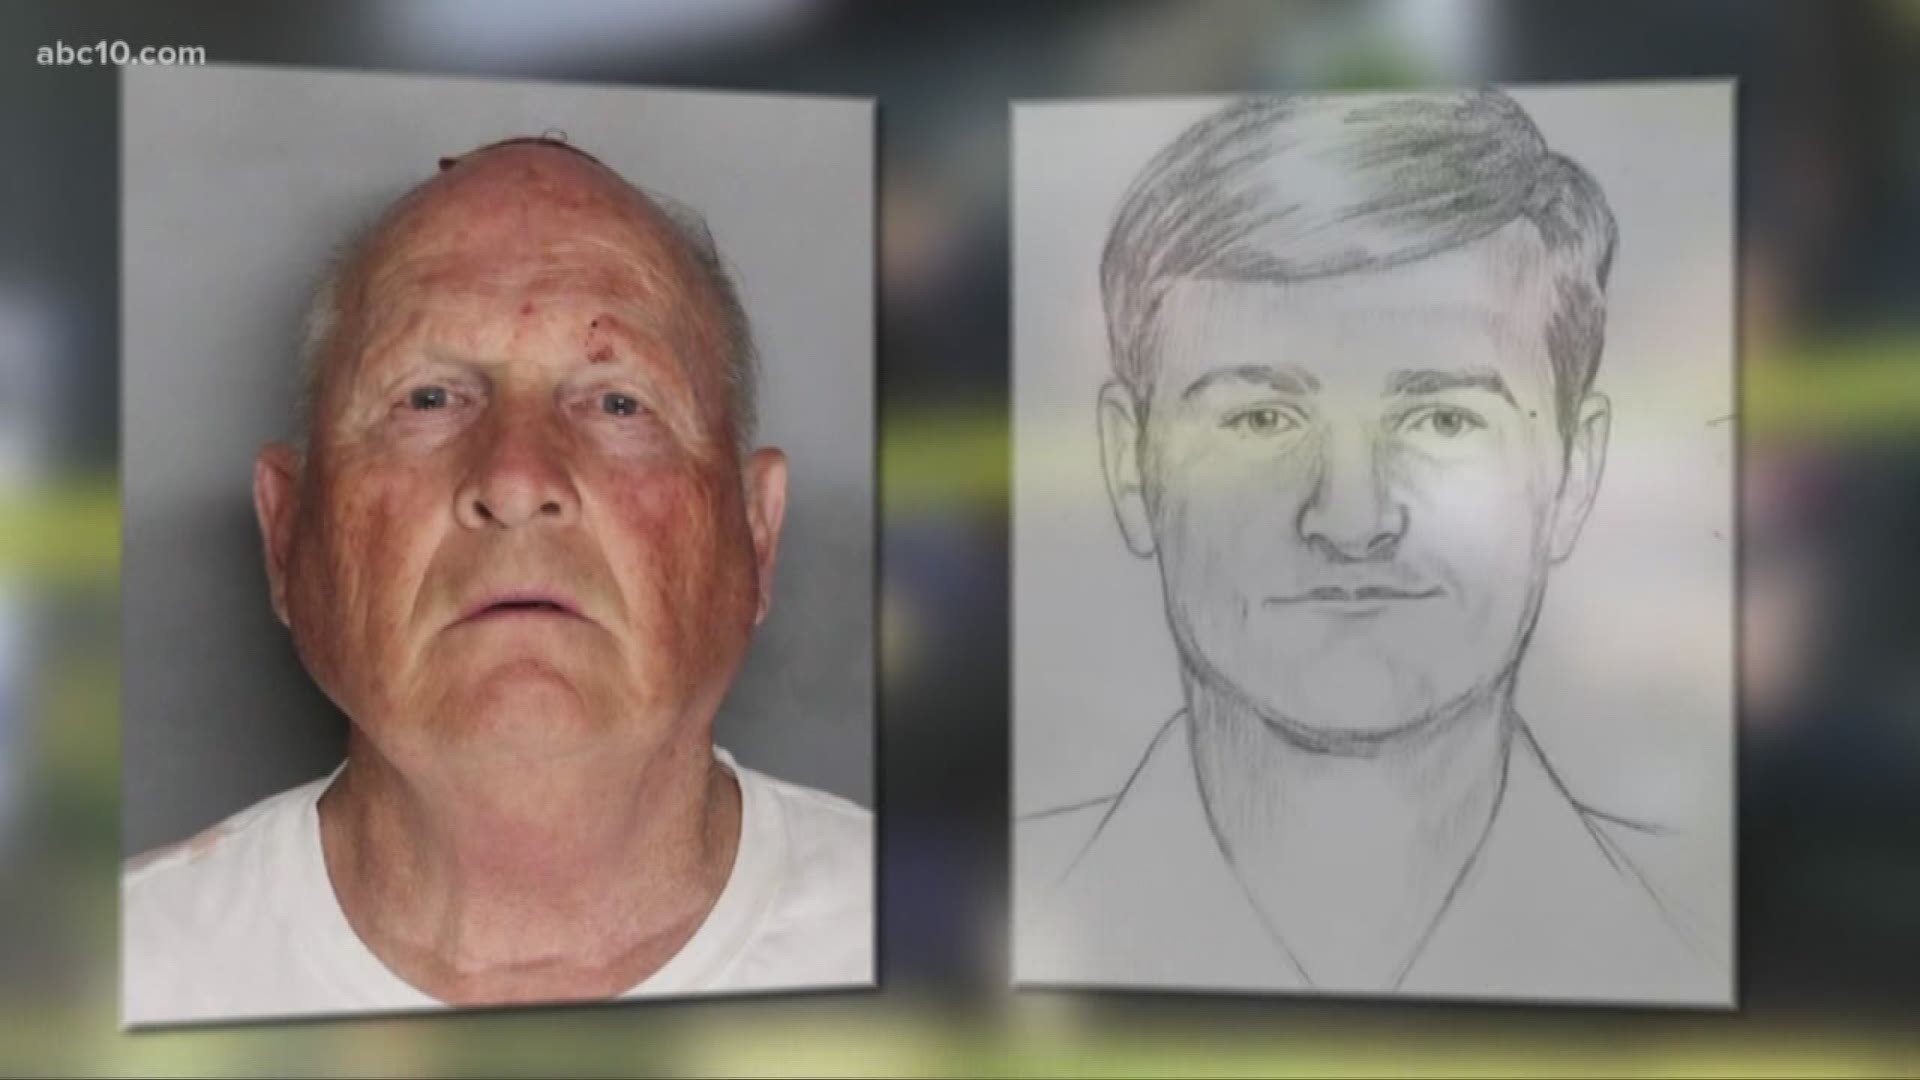 The suspected Golden State Killer, Joseph DeAngelo, is expected to be back in court until May.